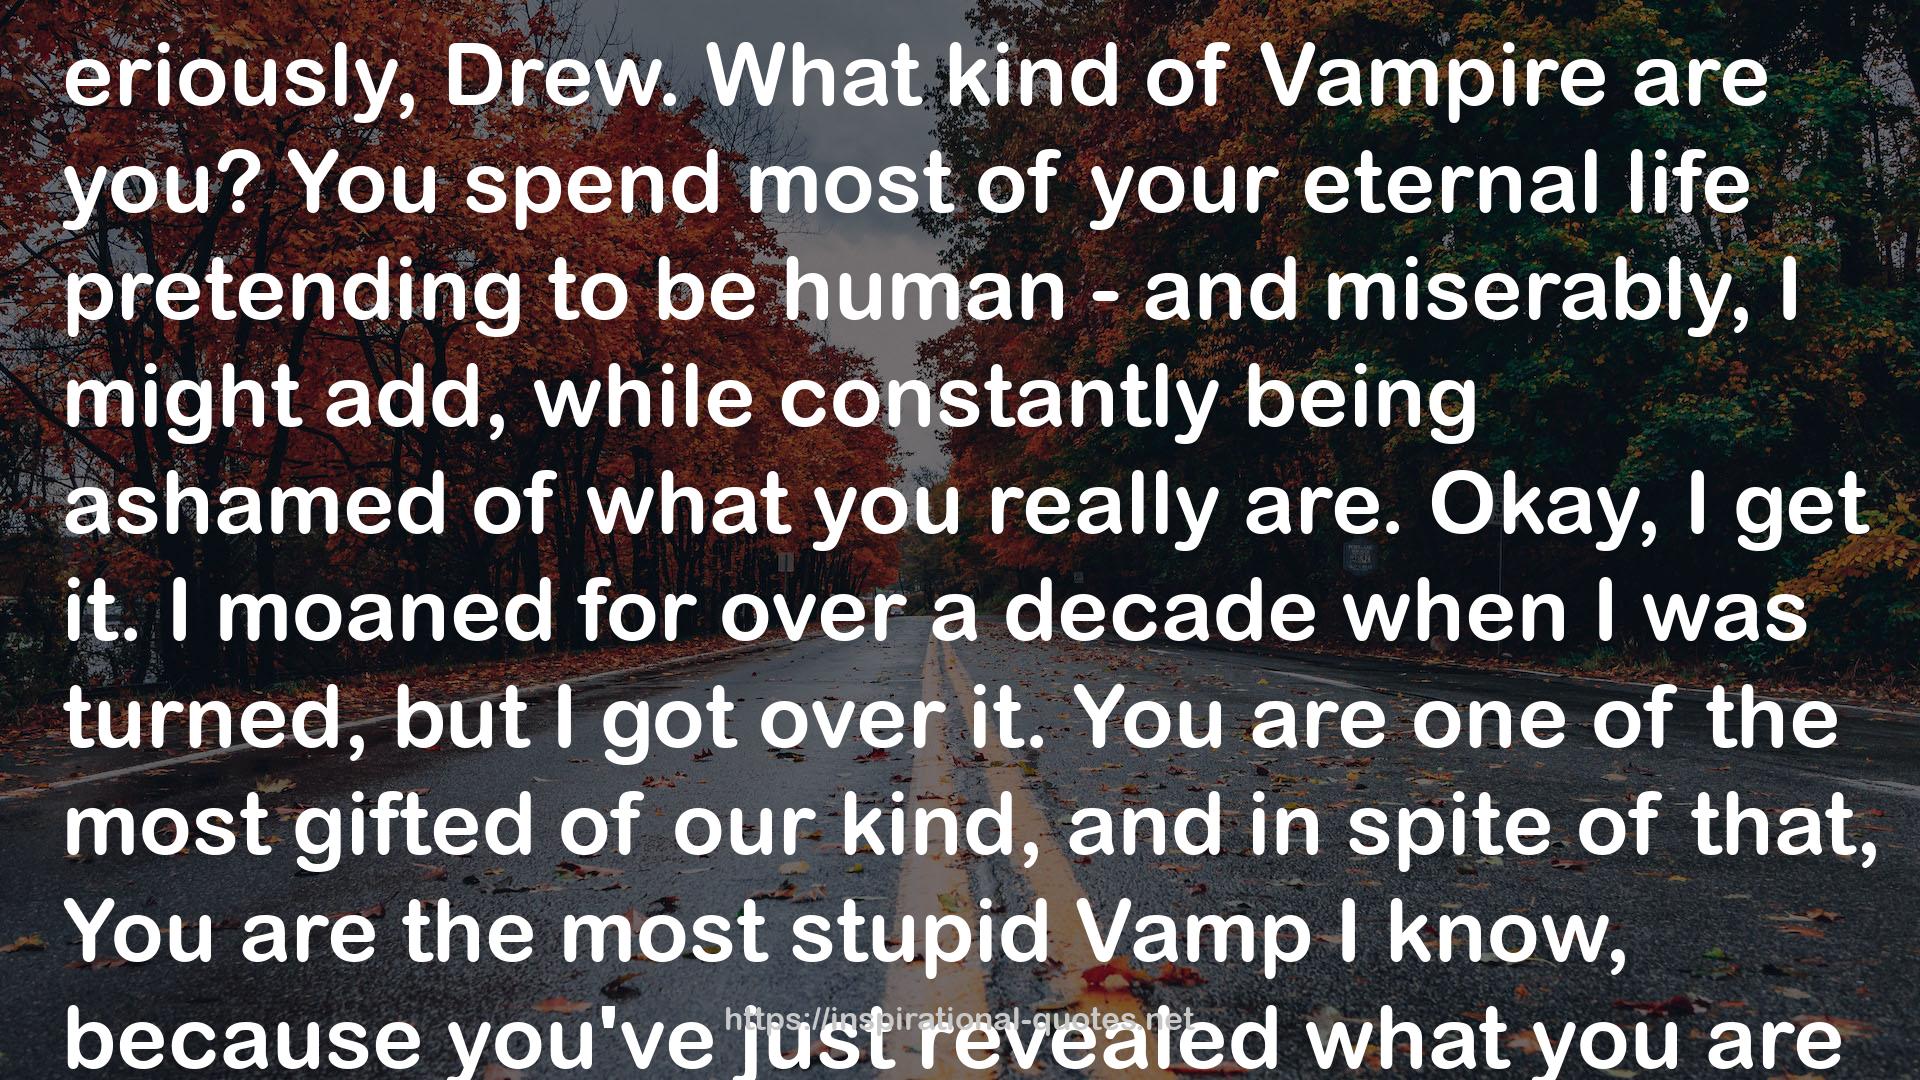 the most stupid Vamp  QUOTES